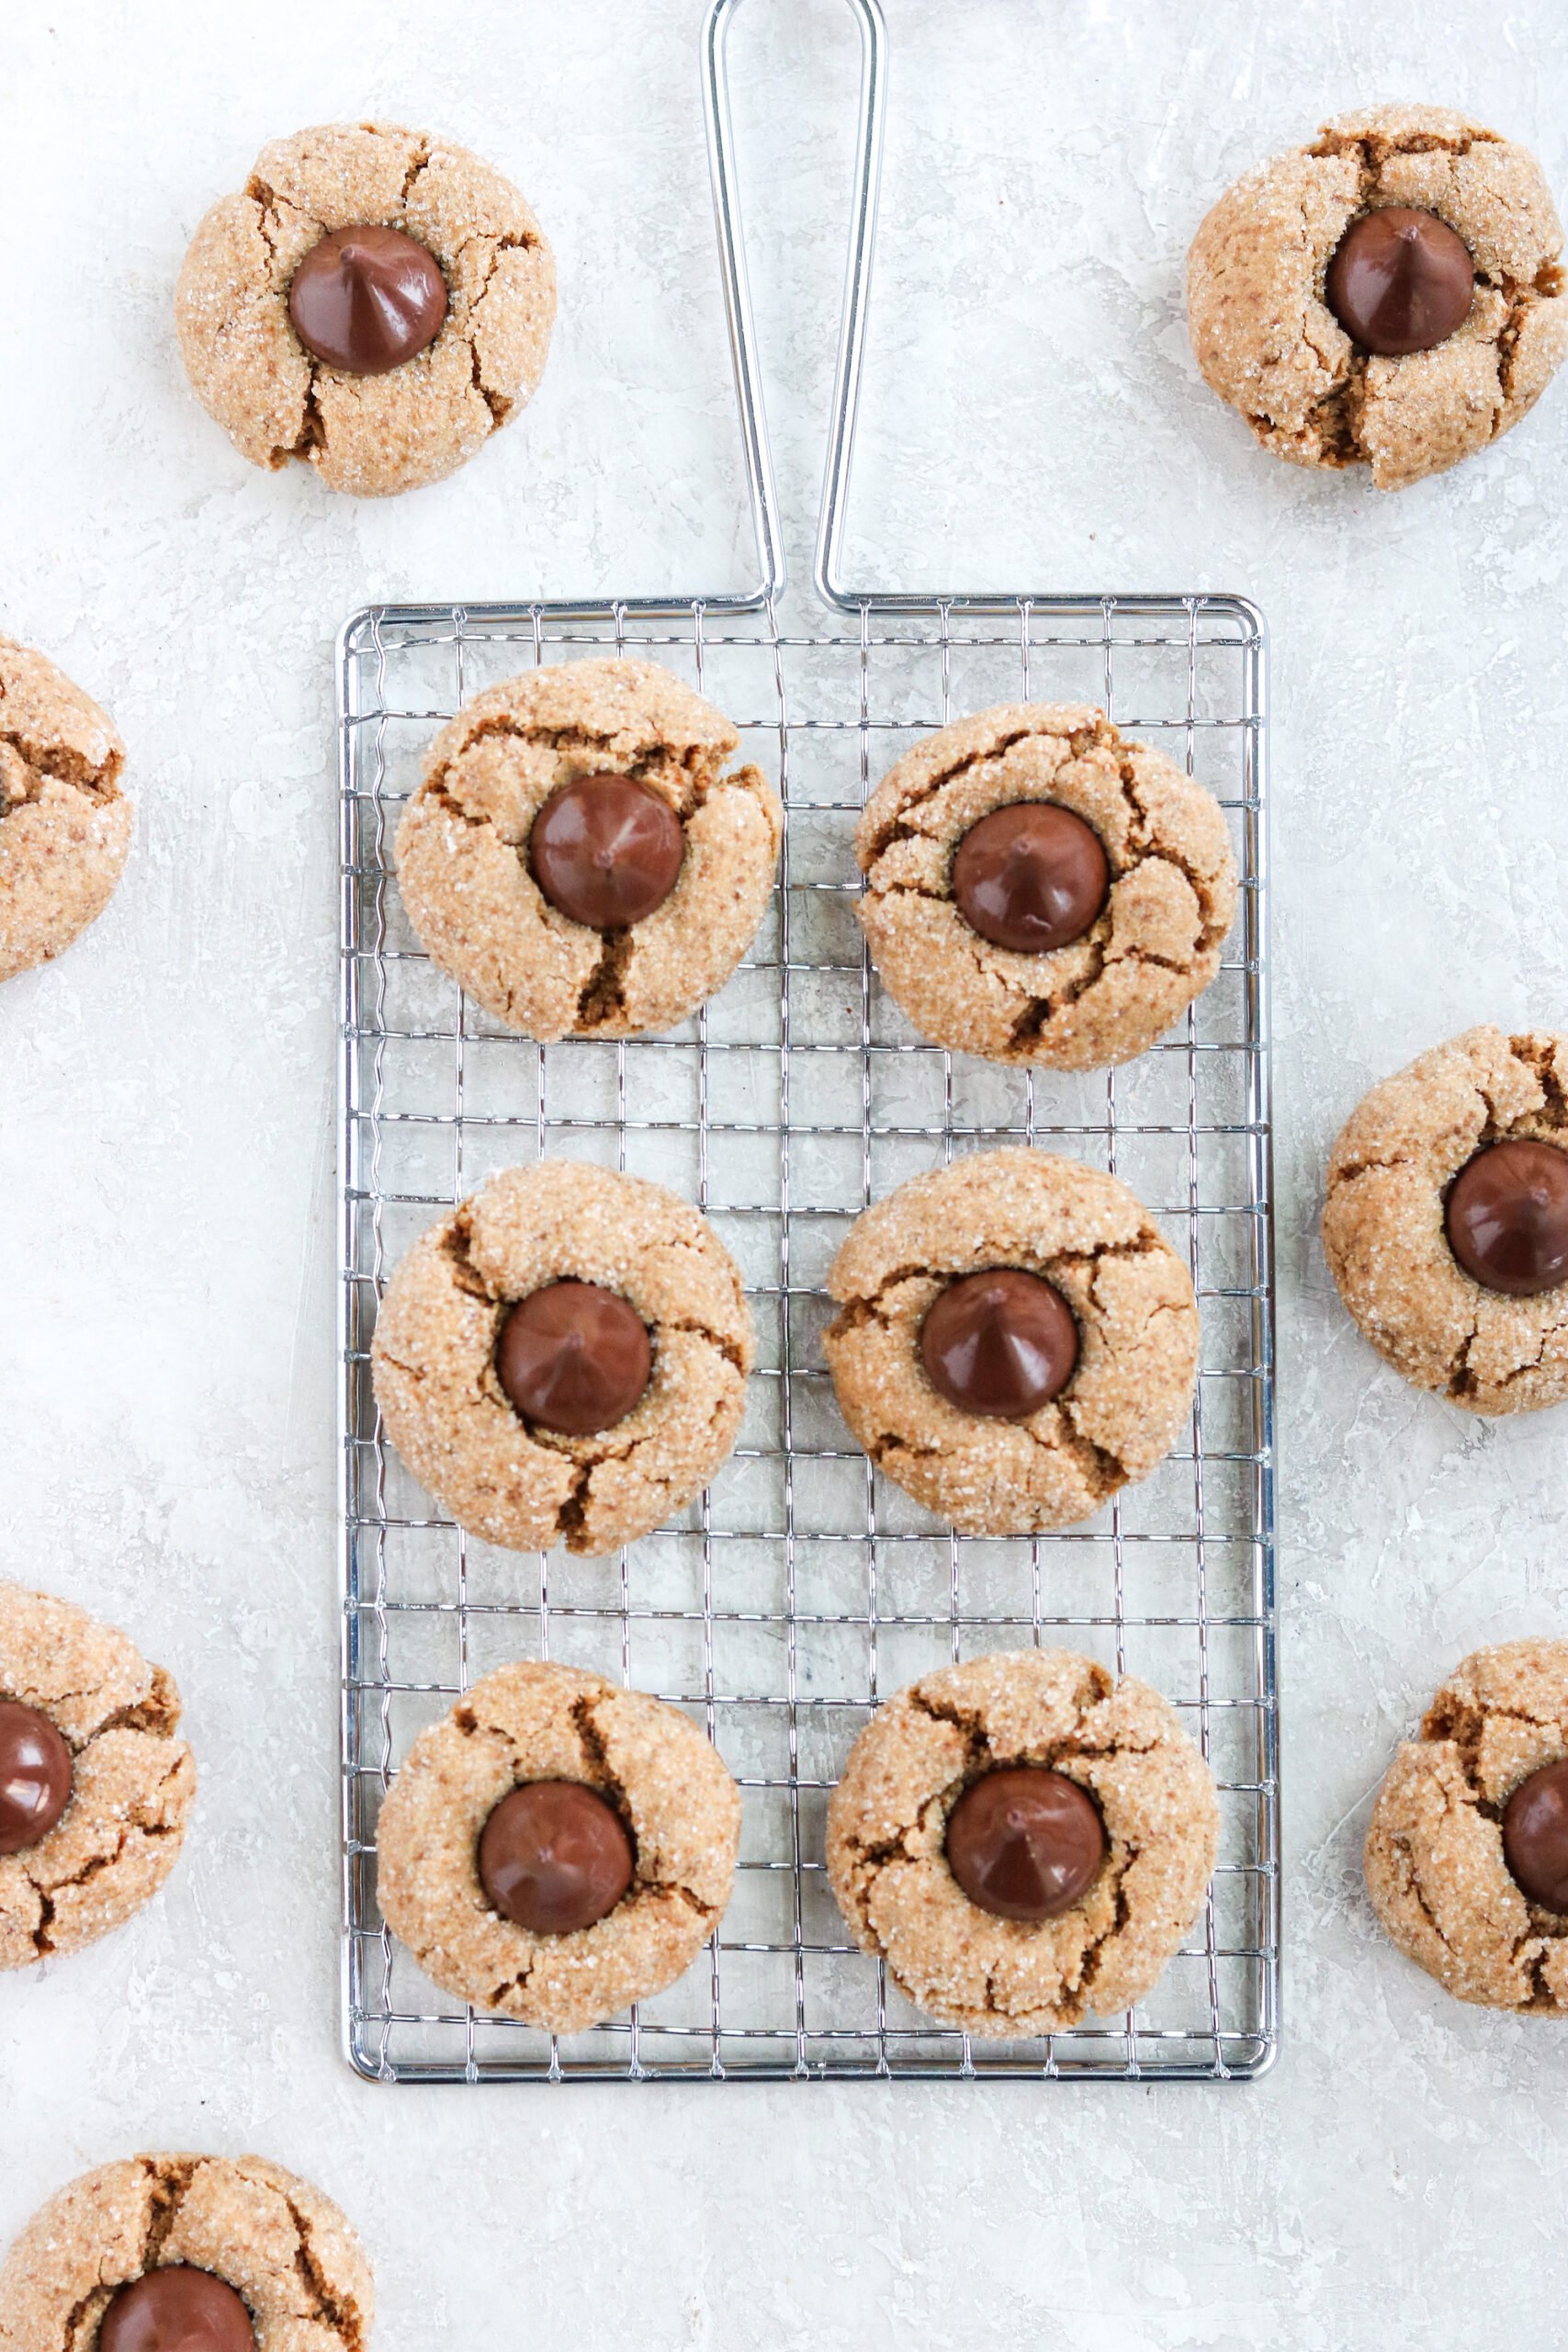 Peanut Butter blossoms made with gluten free ingredients on a cooling rack